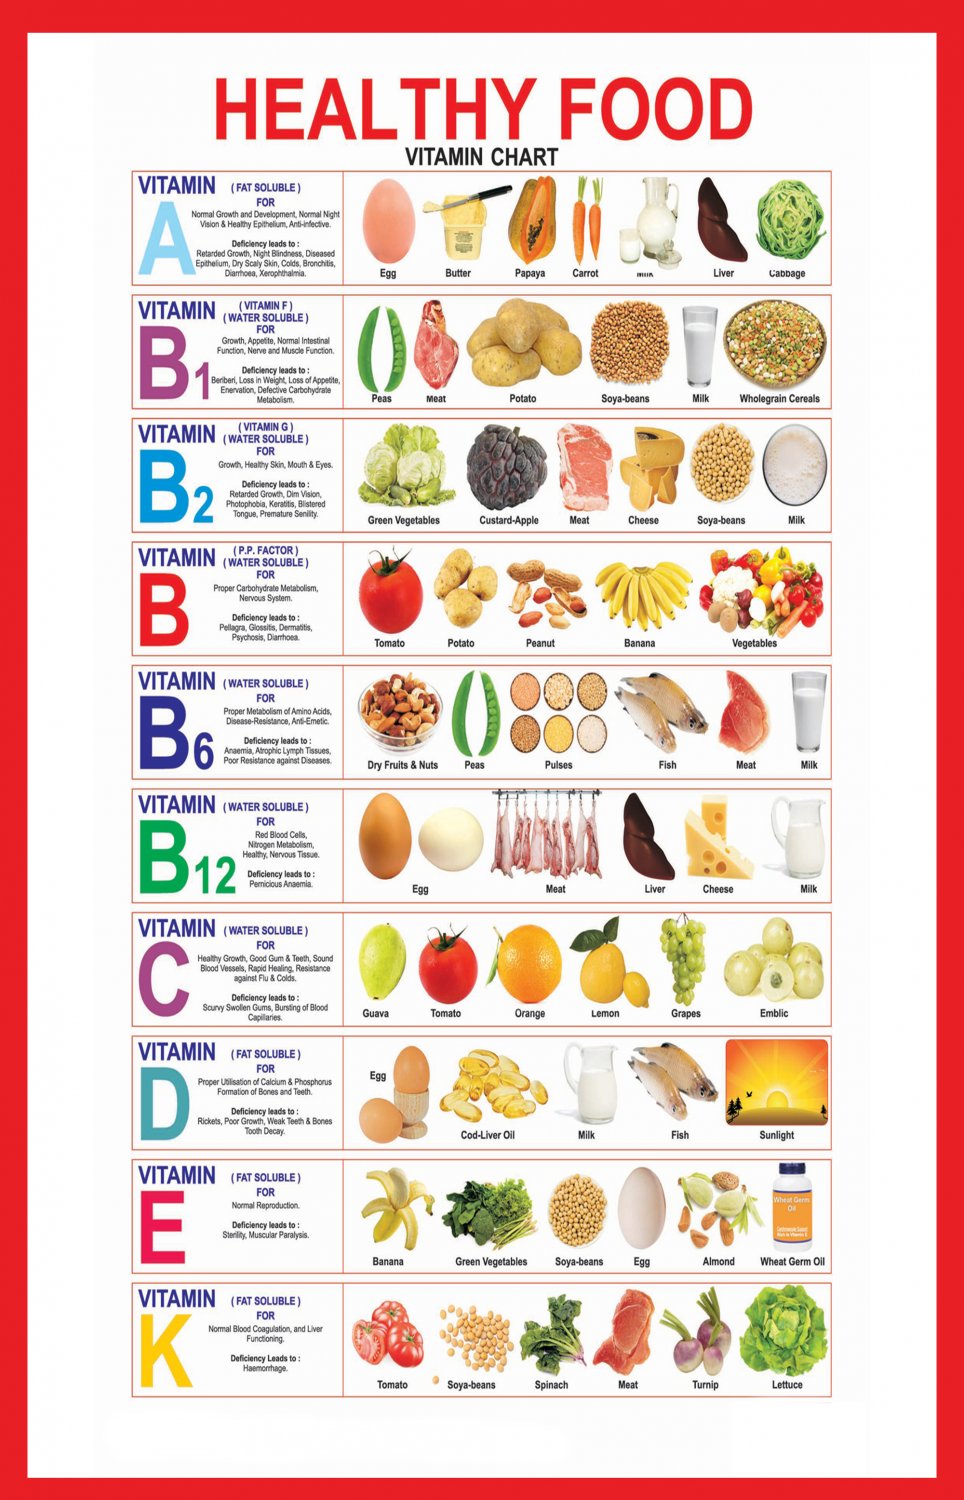 nutrition infographic